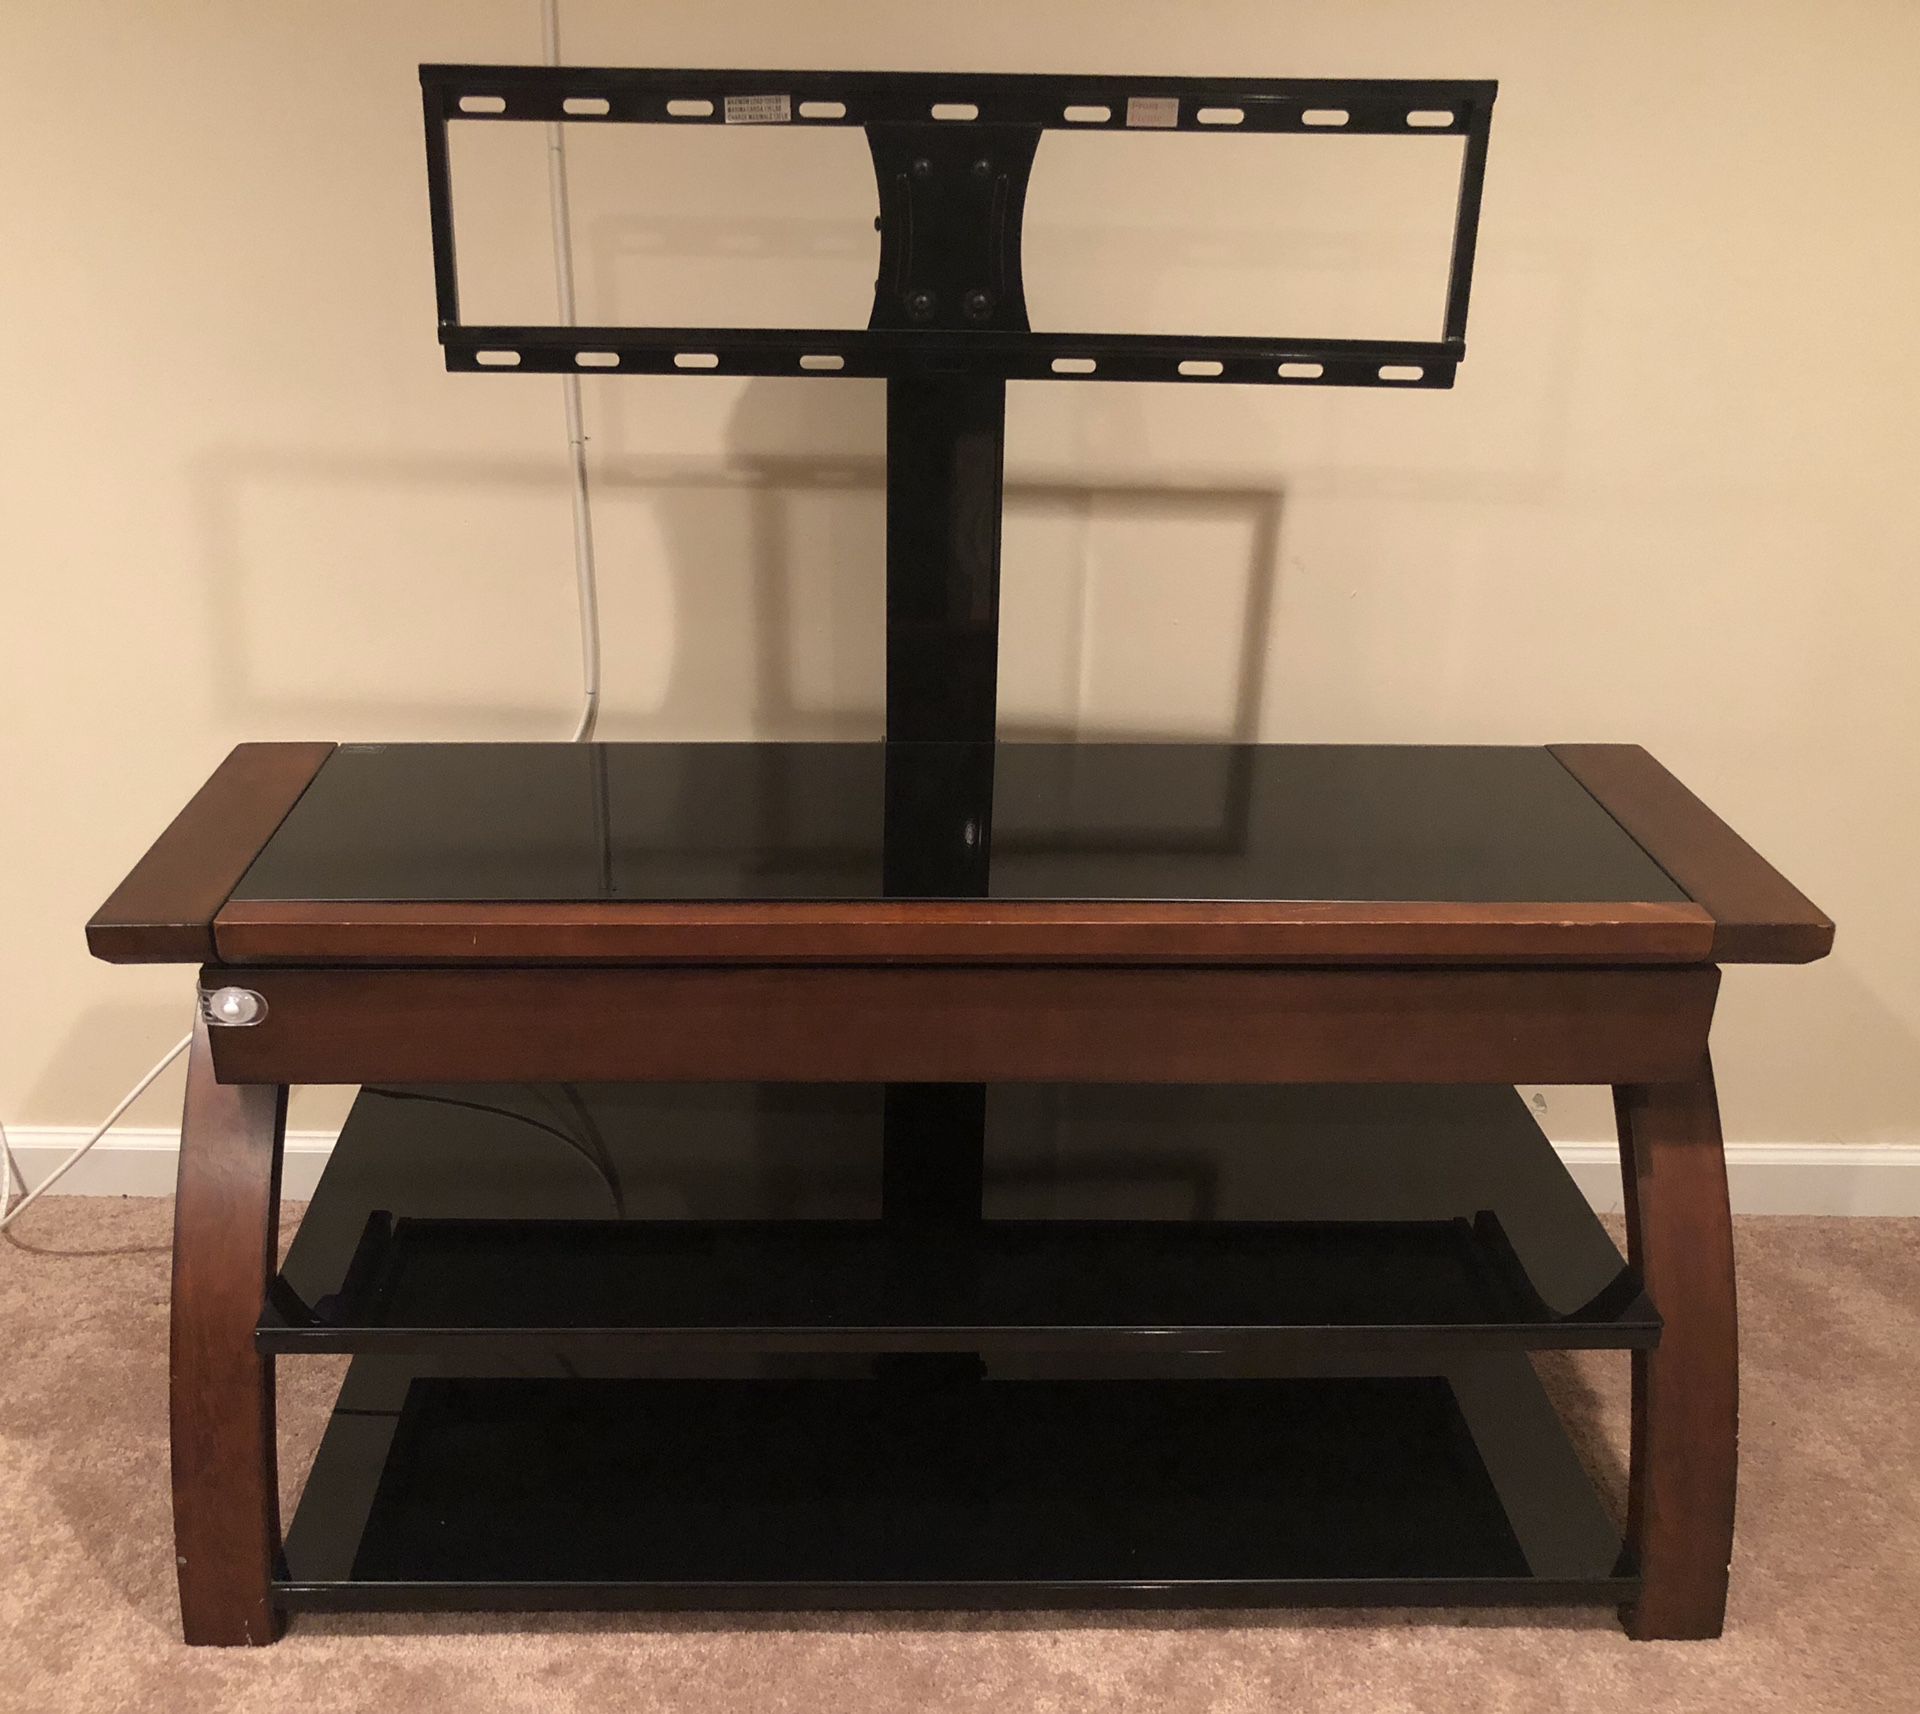 TV stand w/ shelves and drawer